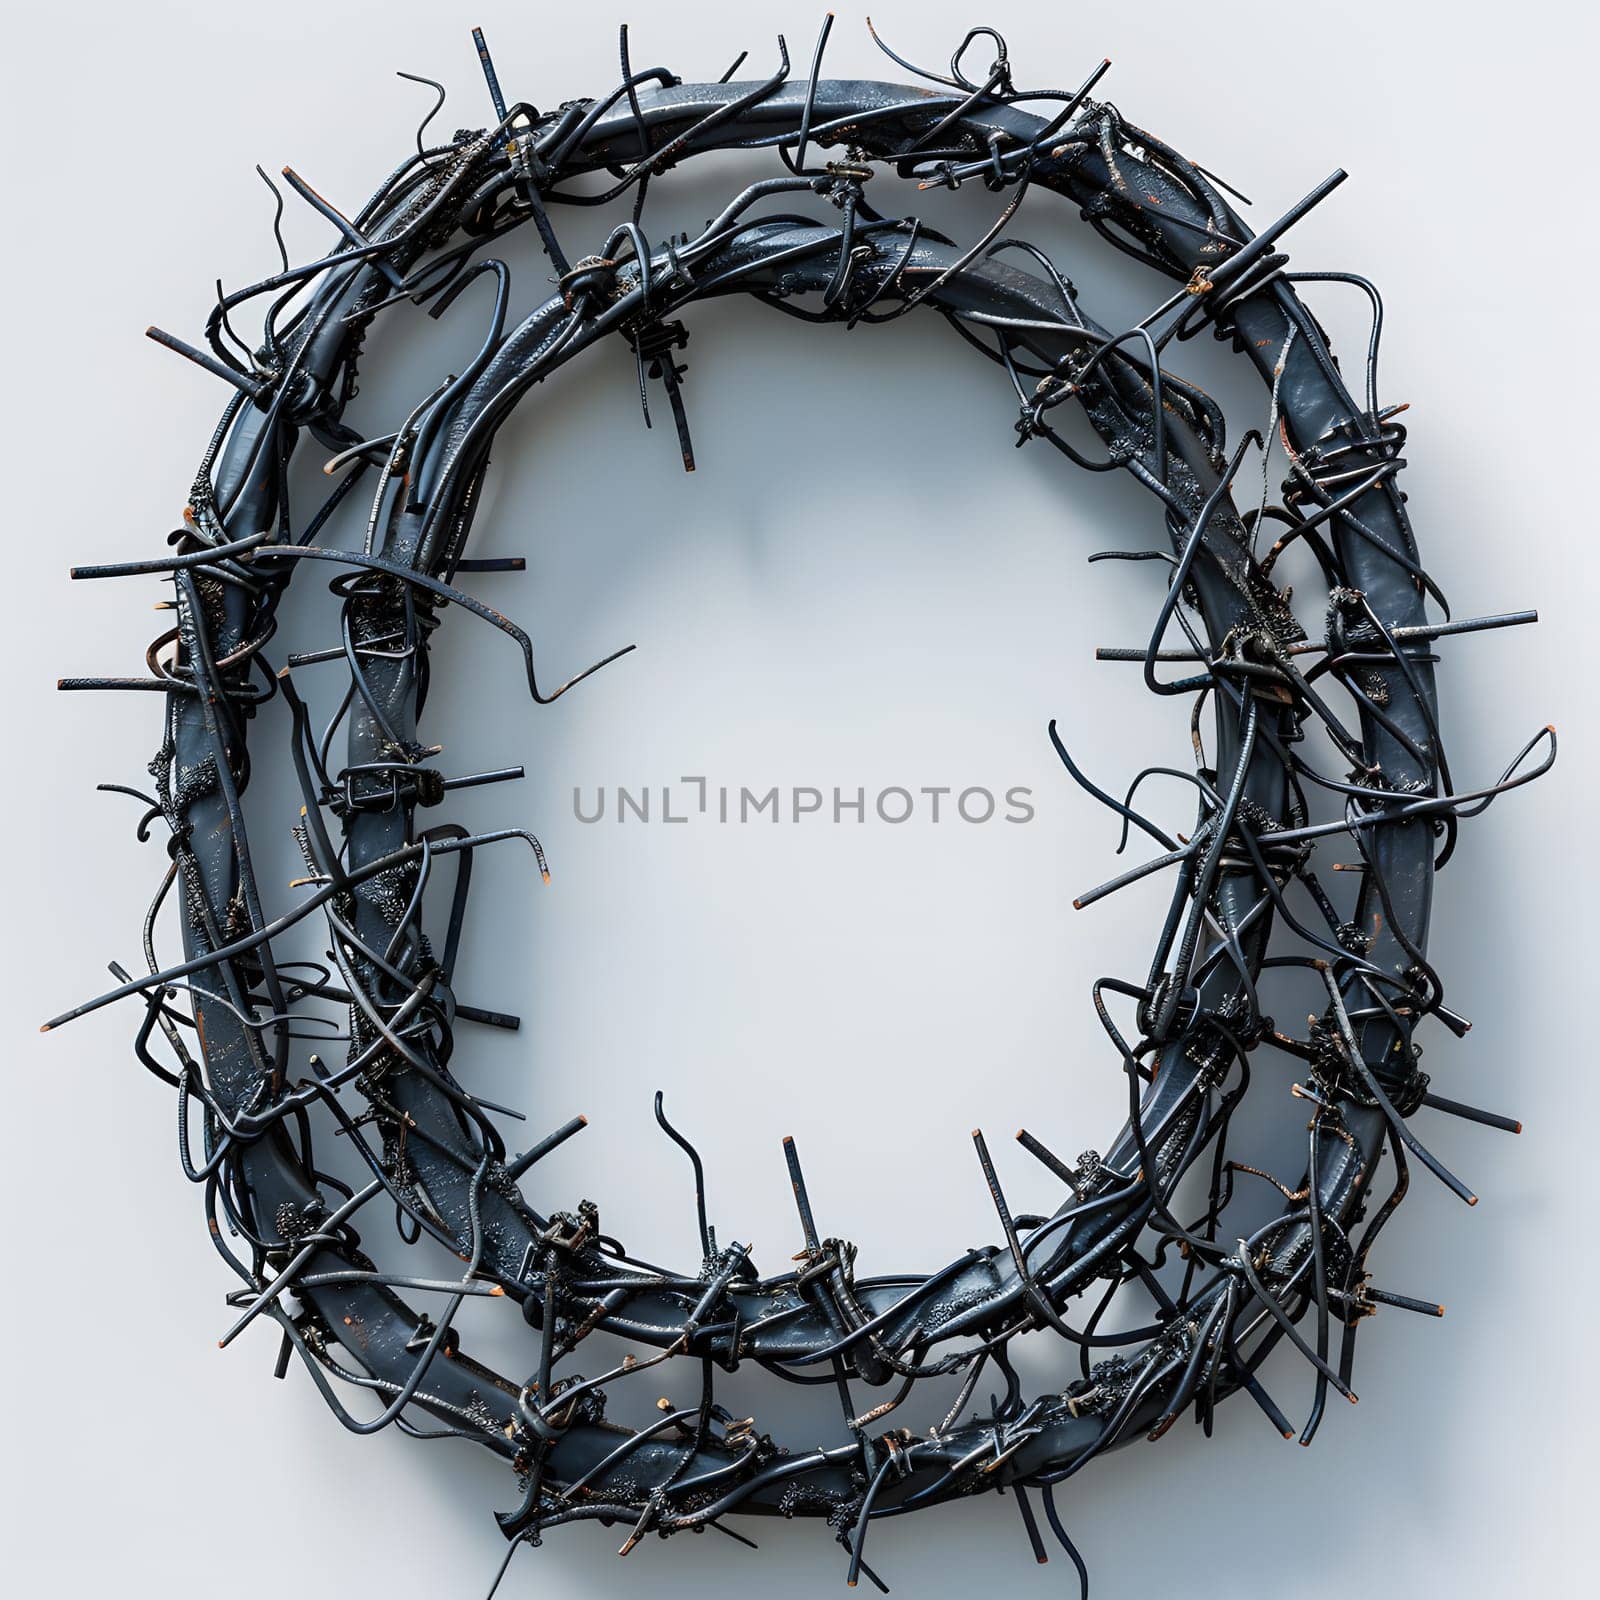 The automotive tire was shaped like a circle, made of barbed wire. The twig font created a unique pattern, resembling a plant fashion accessory at the event